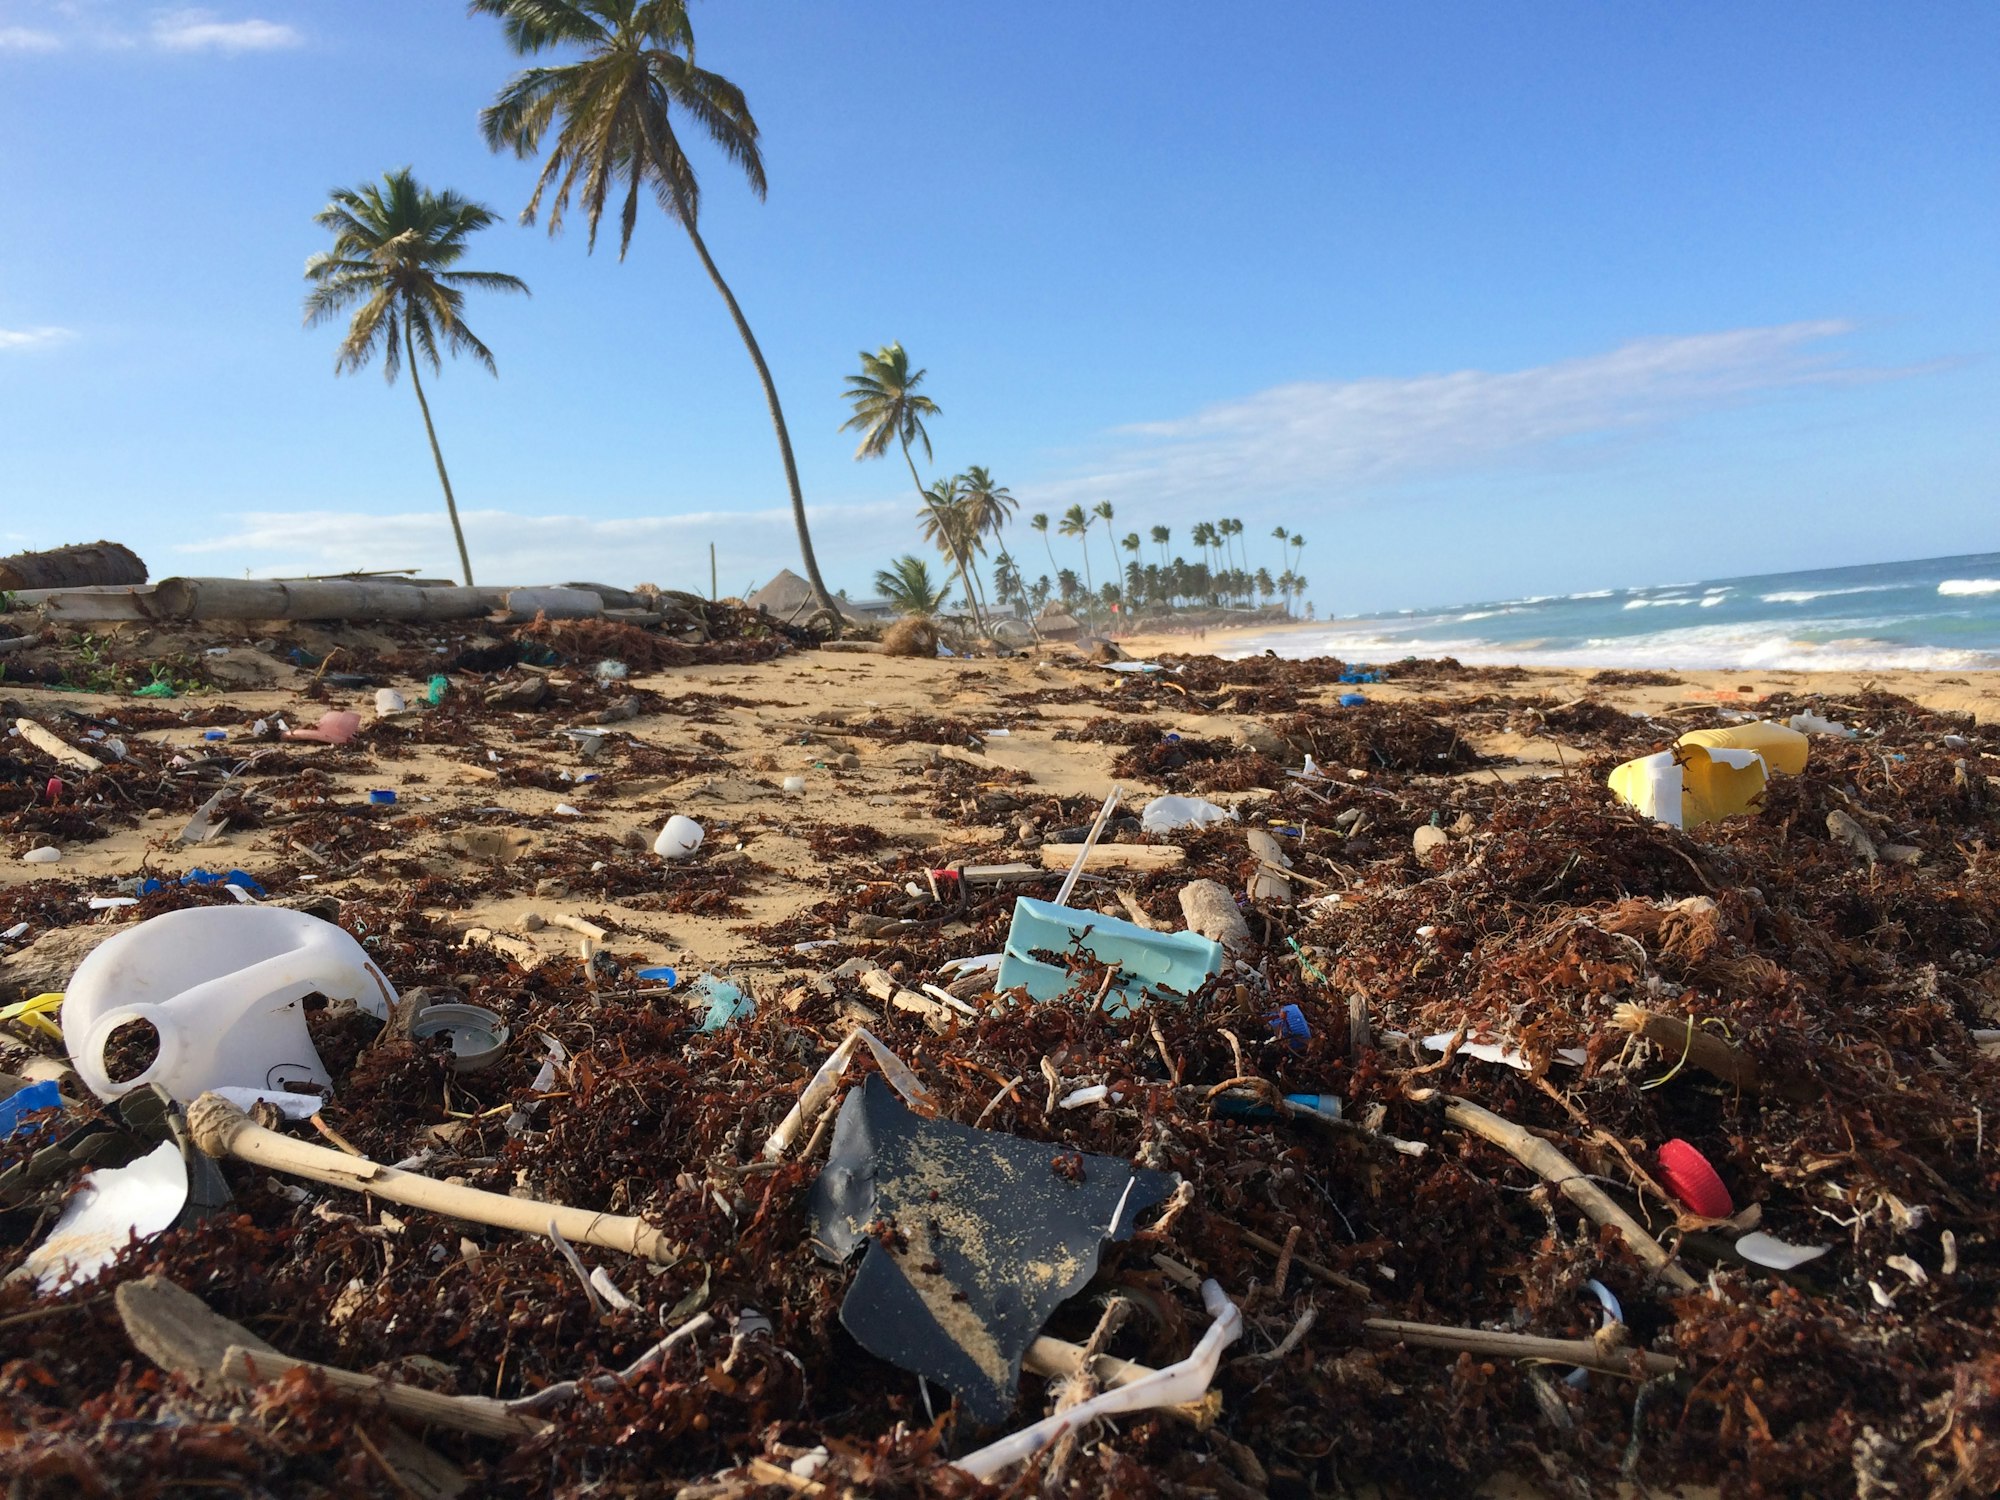 Plastic debris is strewn across a beach, tangled in with seaweed, with palms in the distance.